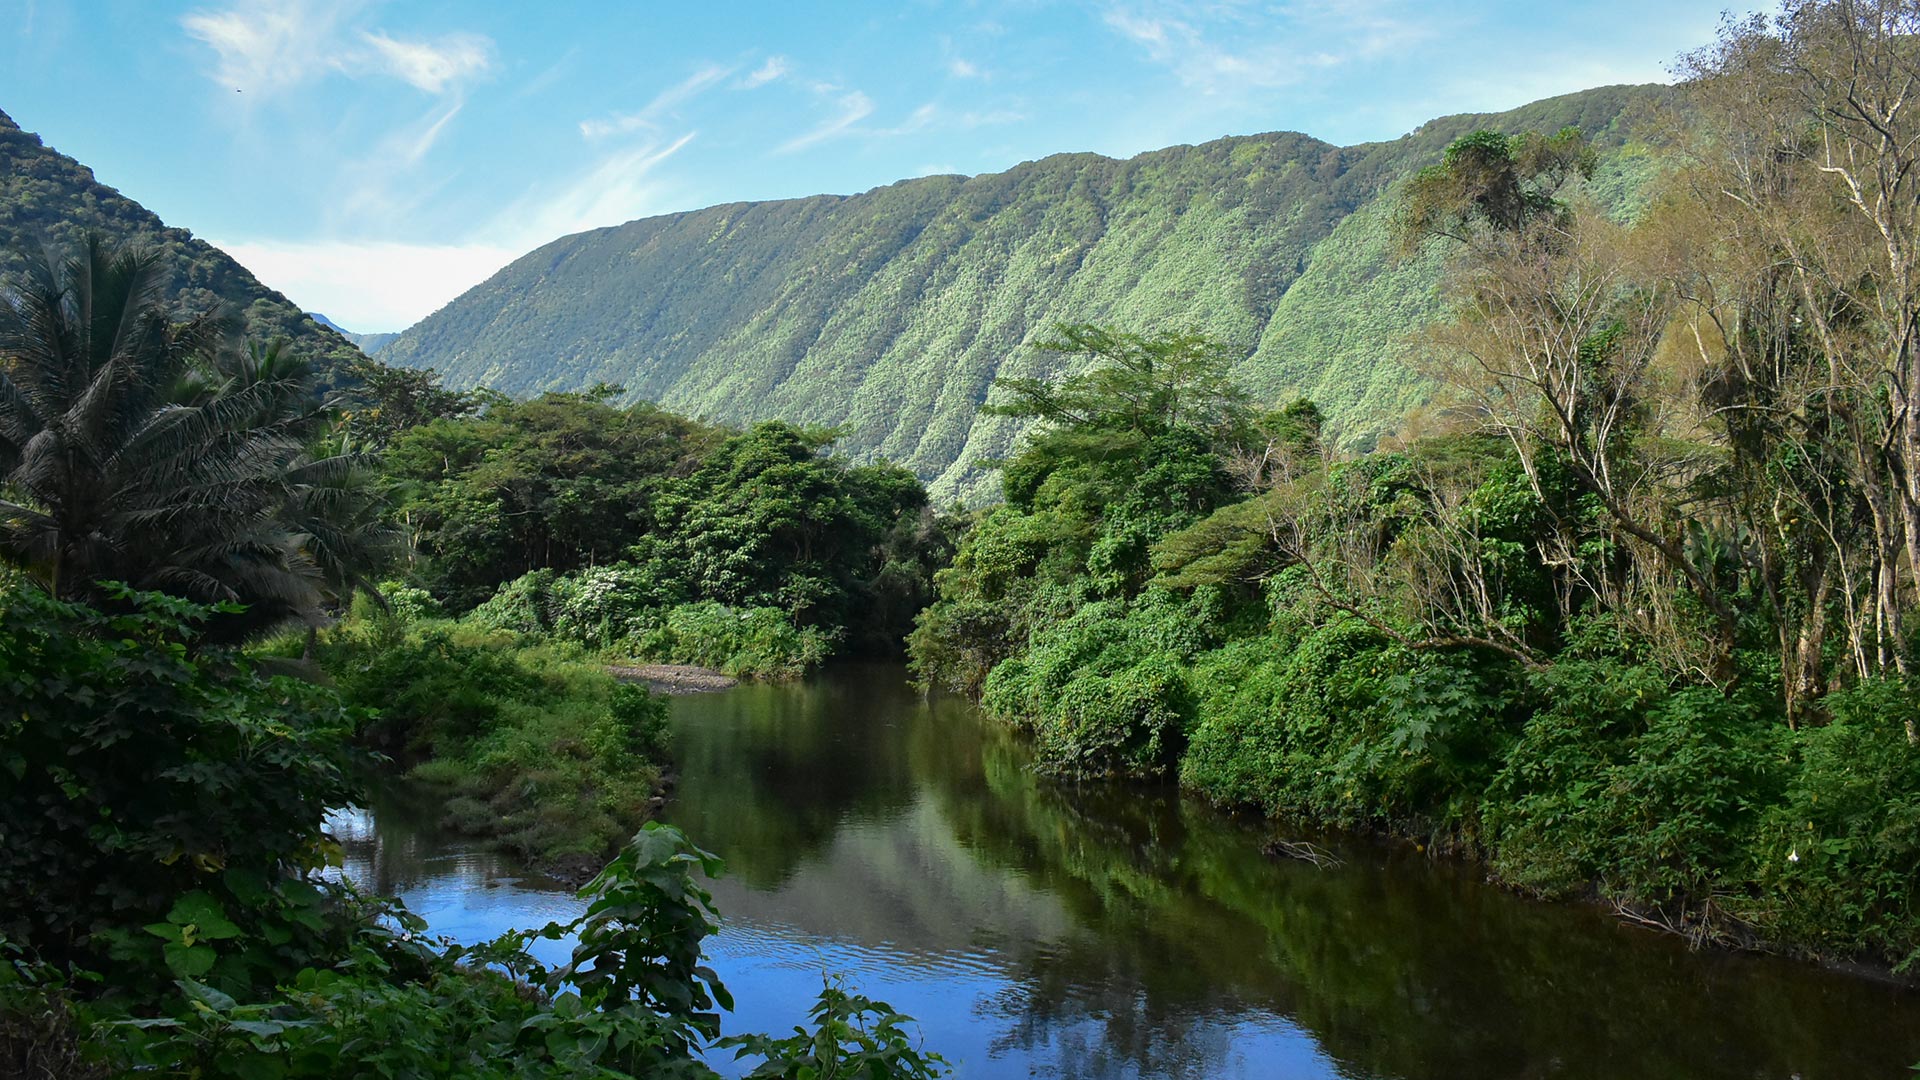 The Waipio Valley provides beautiful spots for hiking